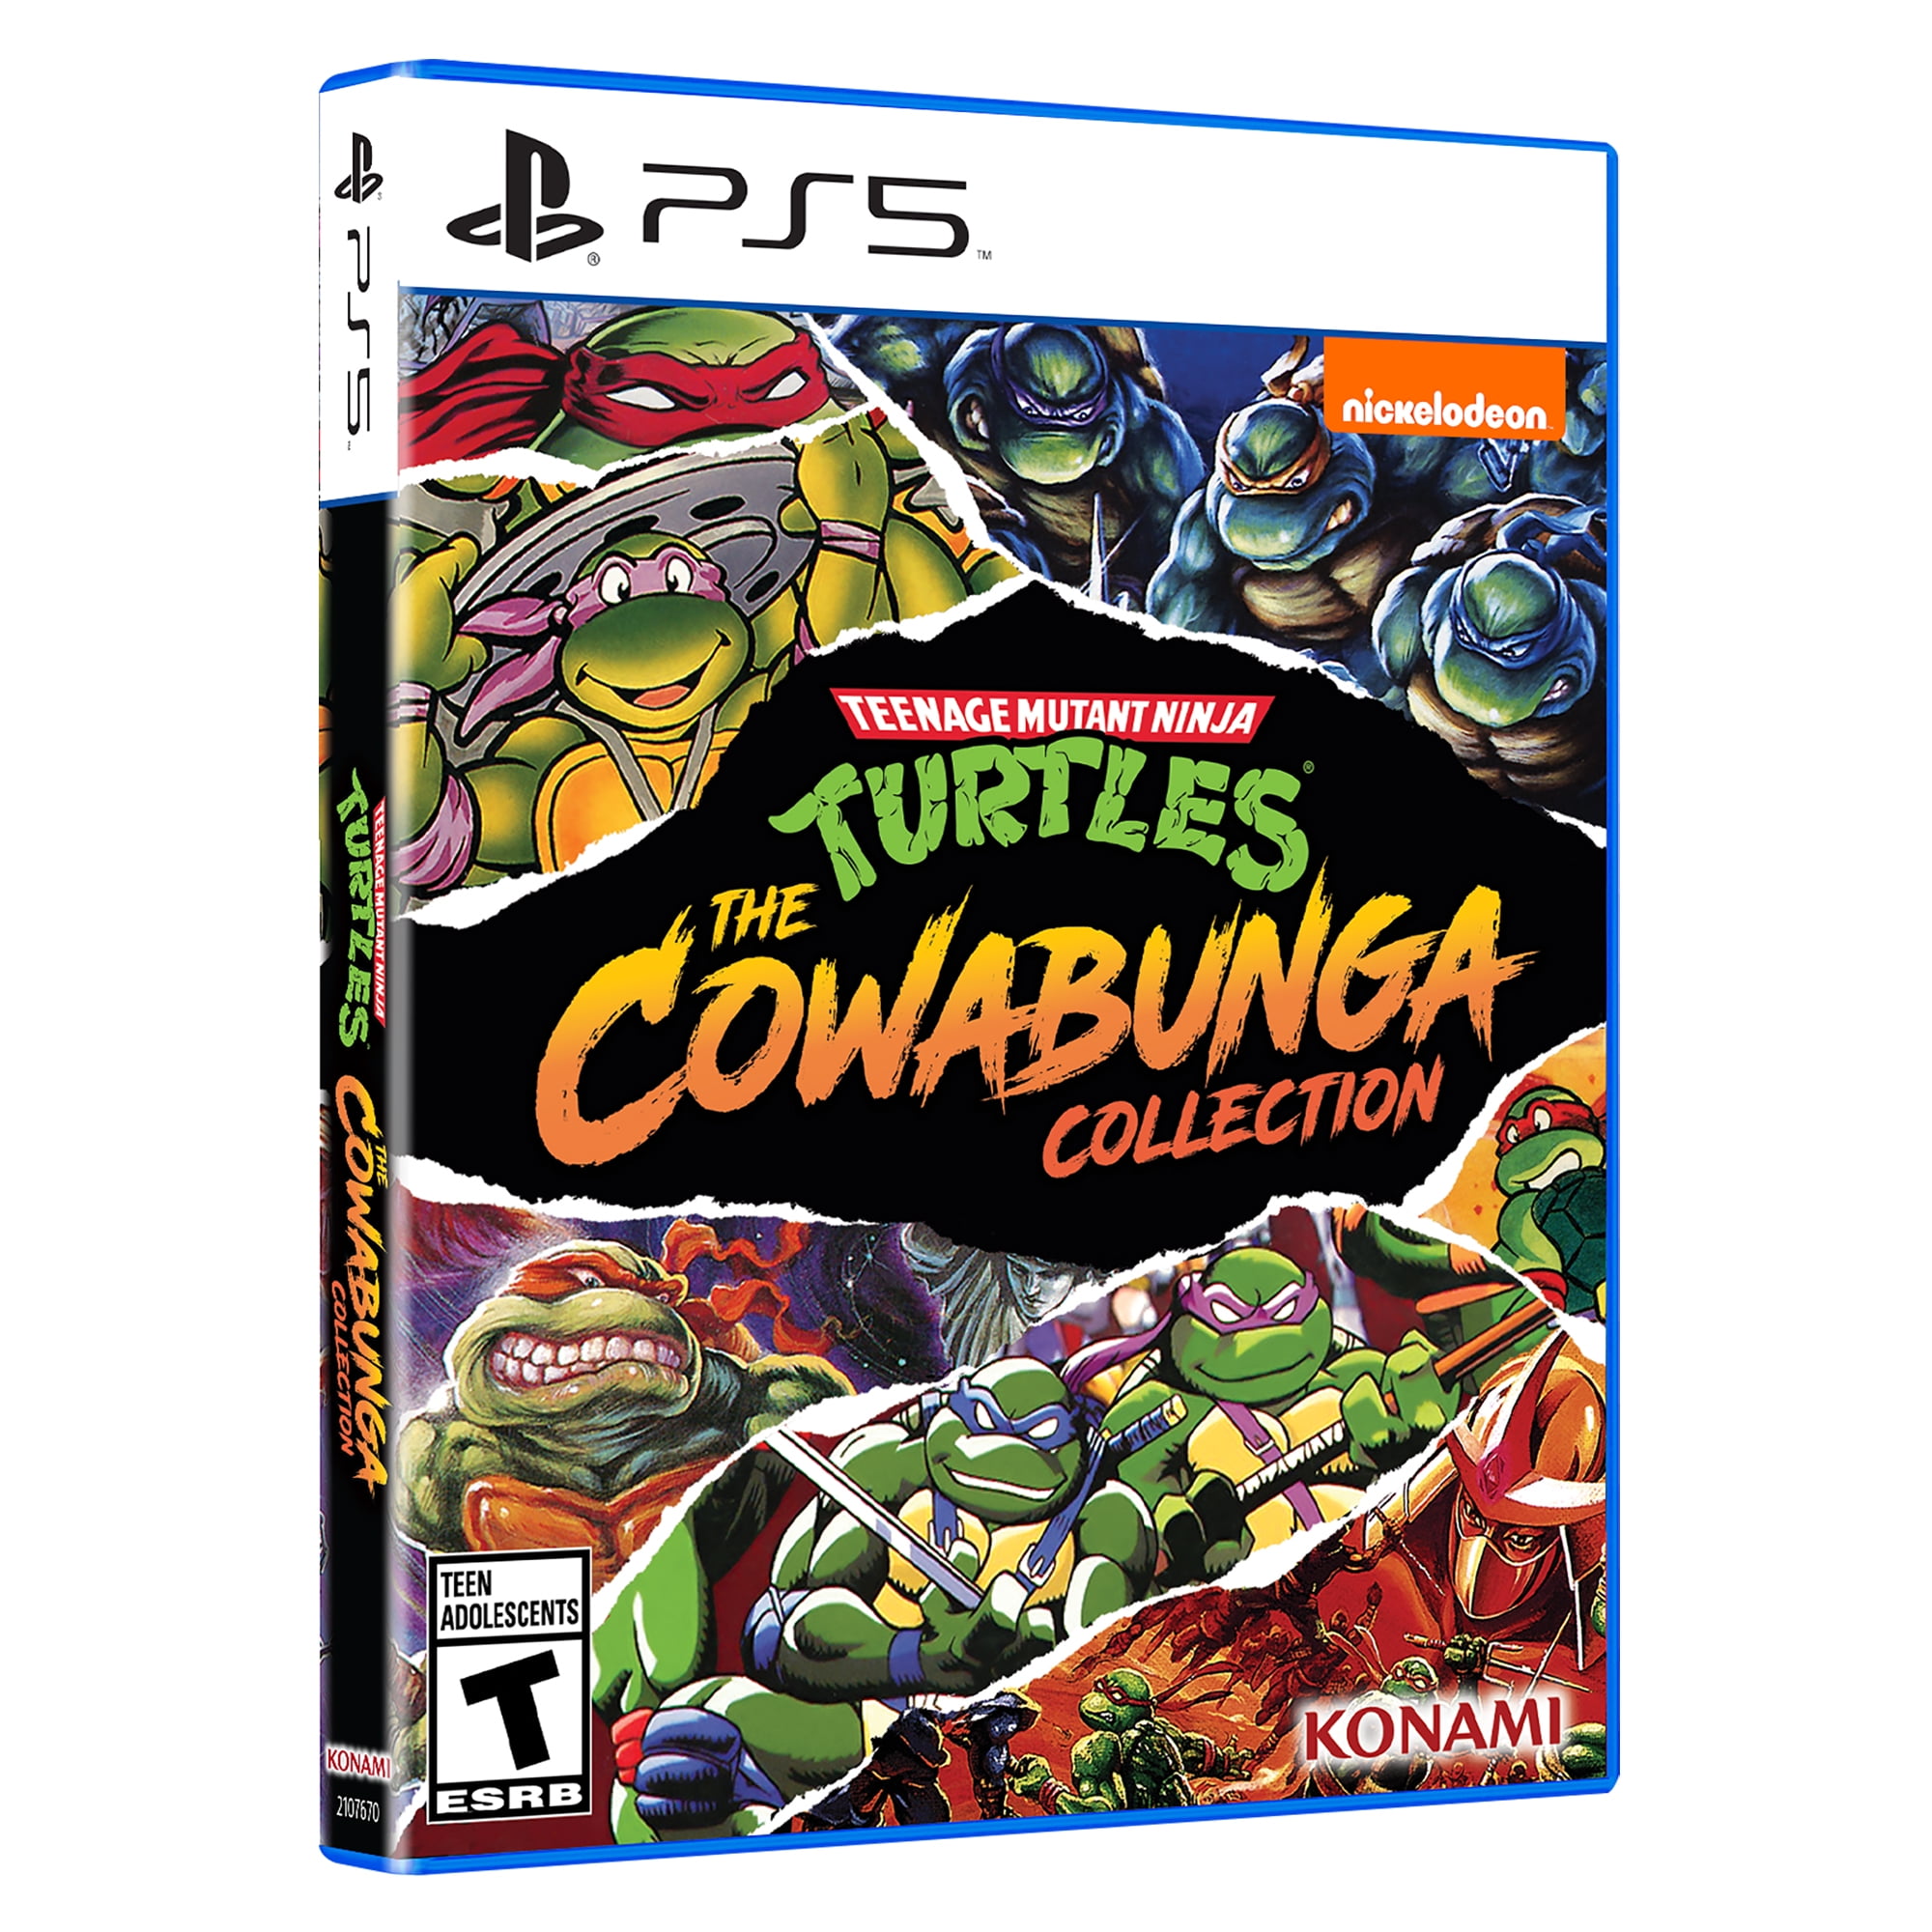 TMNT Cowabunga collection Limited Edition. The Cowabunga collection обложка Xbox. The Cowabunga collection обложка Xbox one. The Cowabunga collection обложка PS.